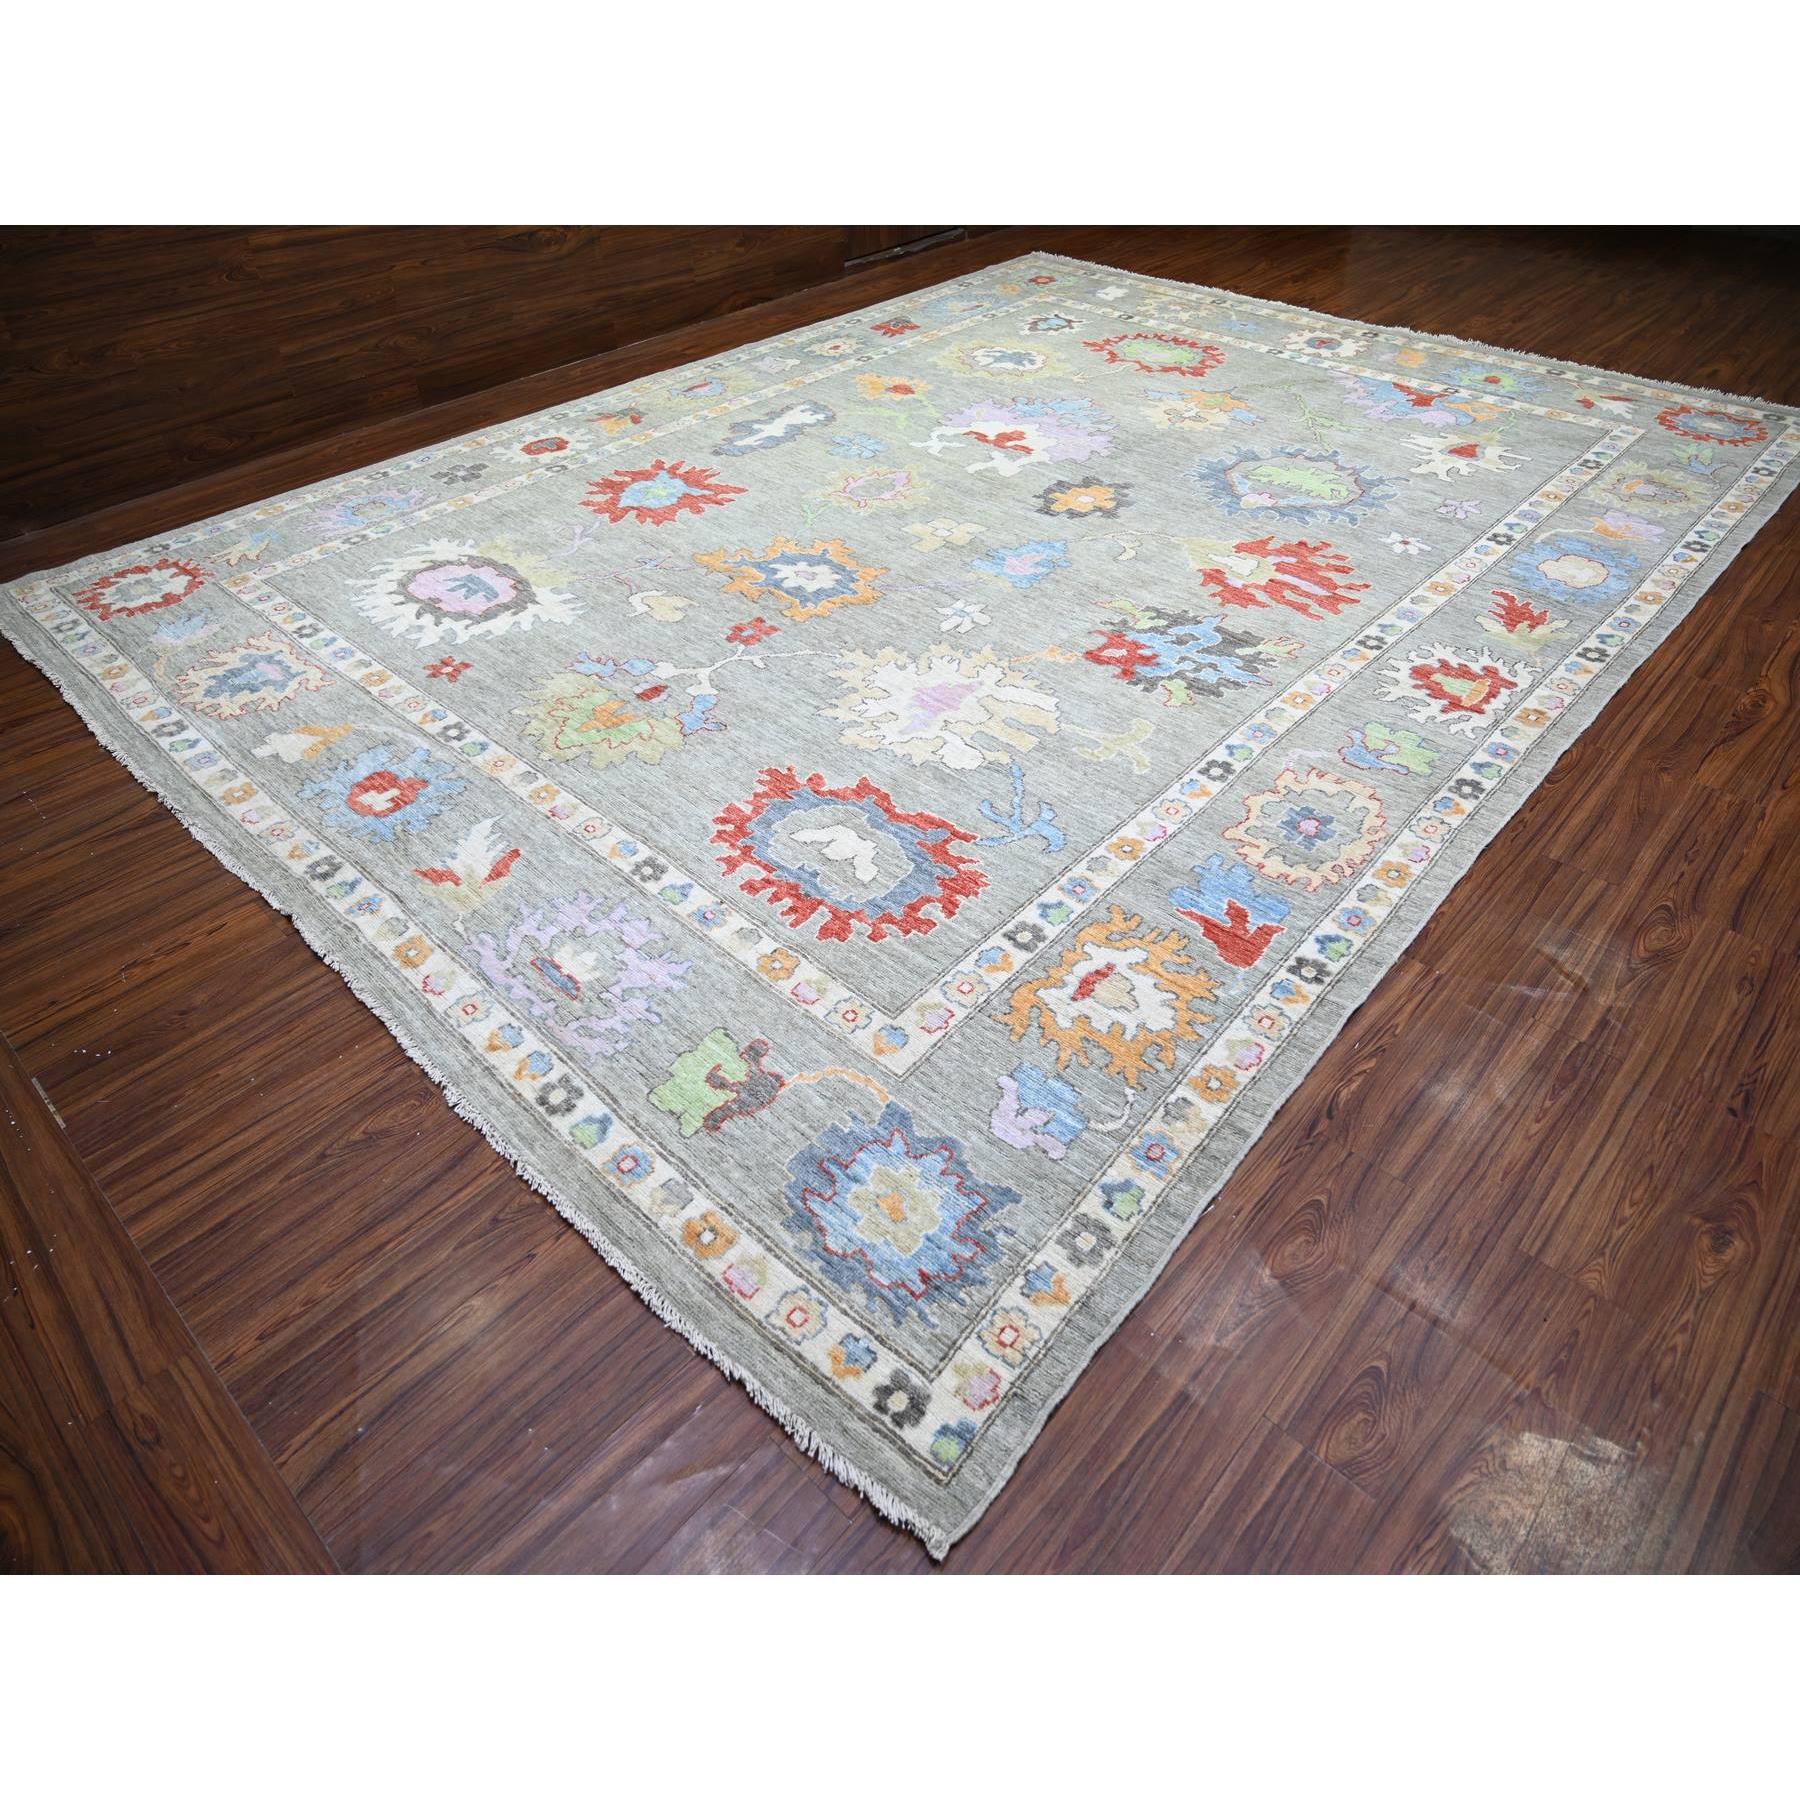 12'x15'8" Cloud Gray, Hand Woven Extra Soft Wool, Natural Dyes Afghan Angora Oushak with Colorful Motifs, Oversized Oriental Rug 